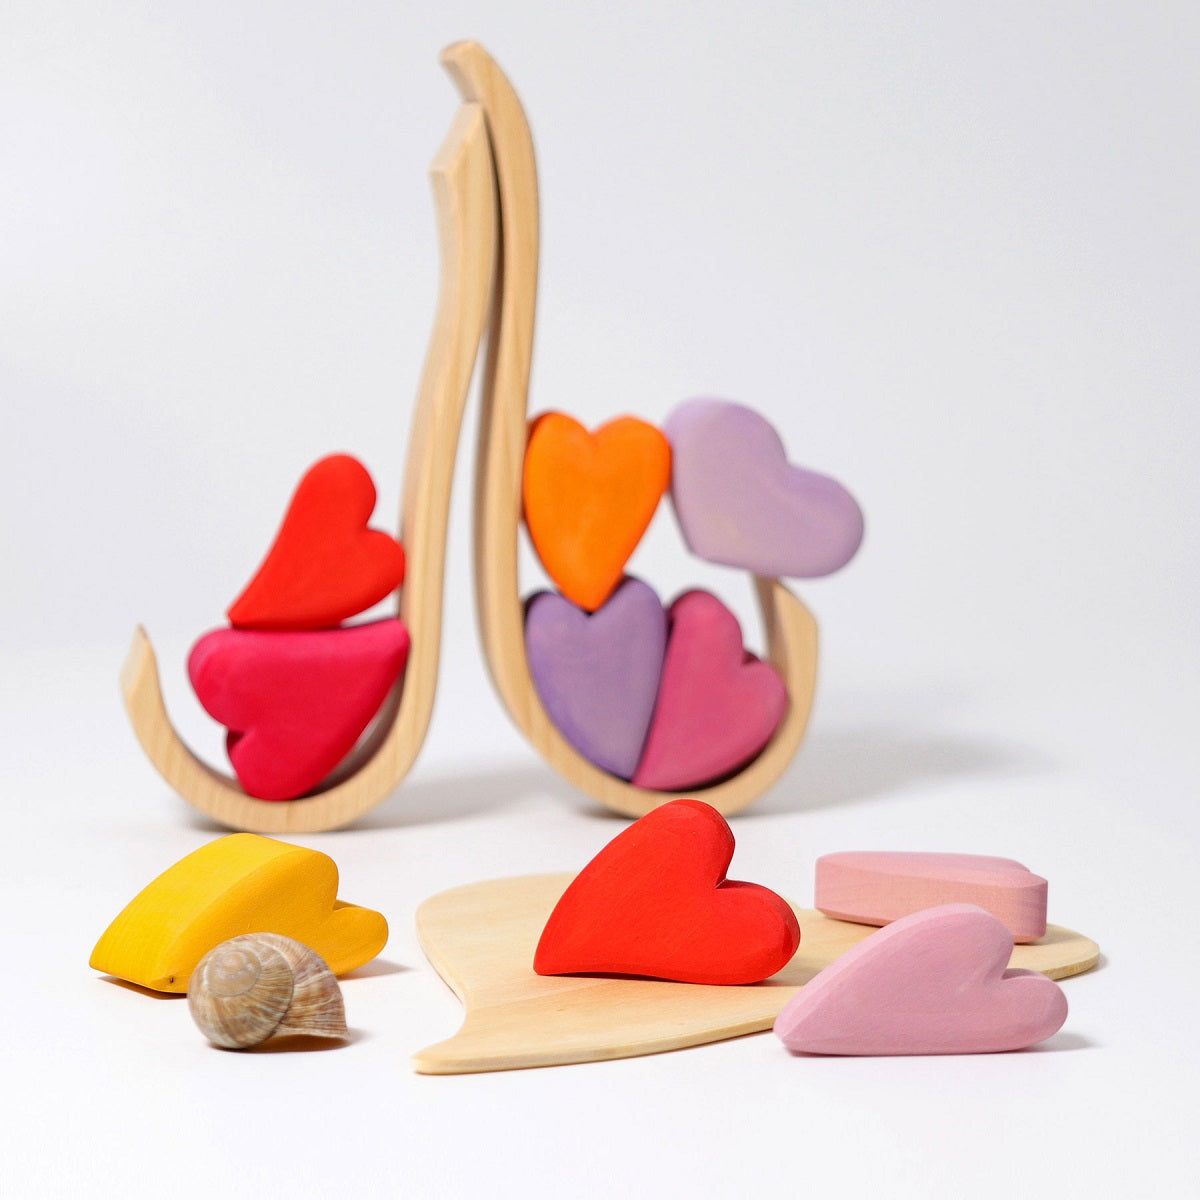 Wooden Toy - RED HEARTS BLOCKS Building set, 10 hearts!